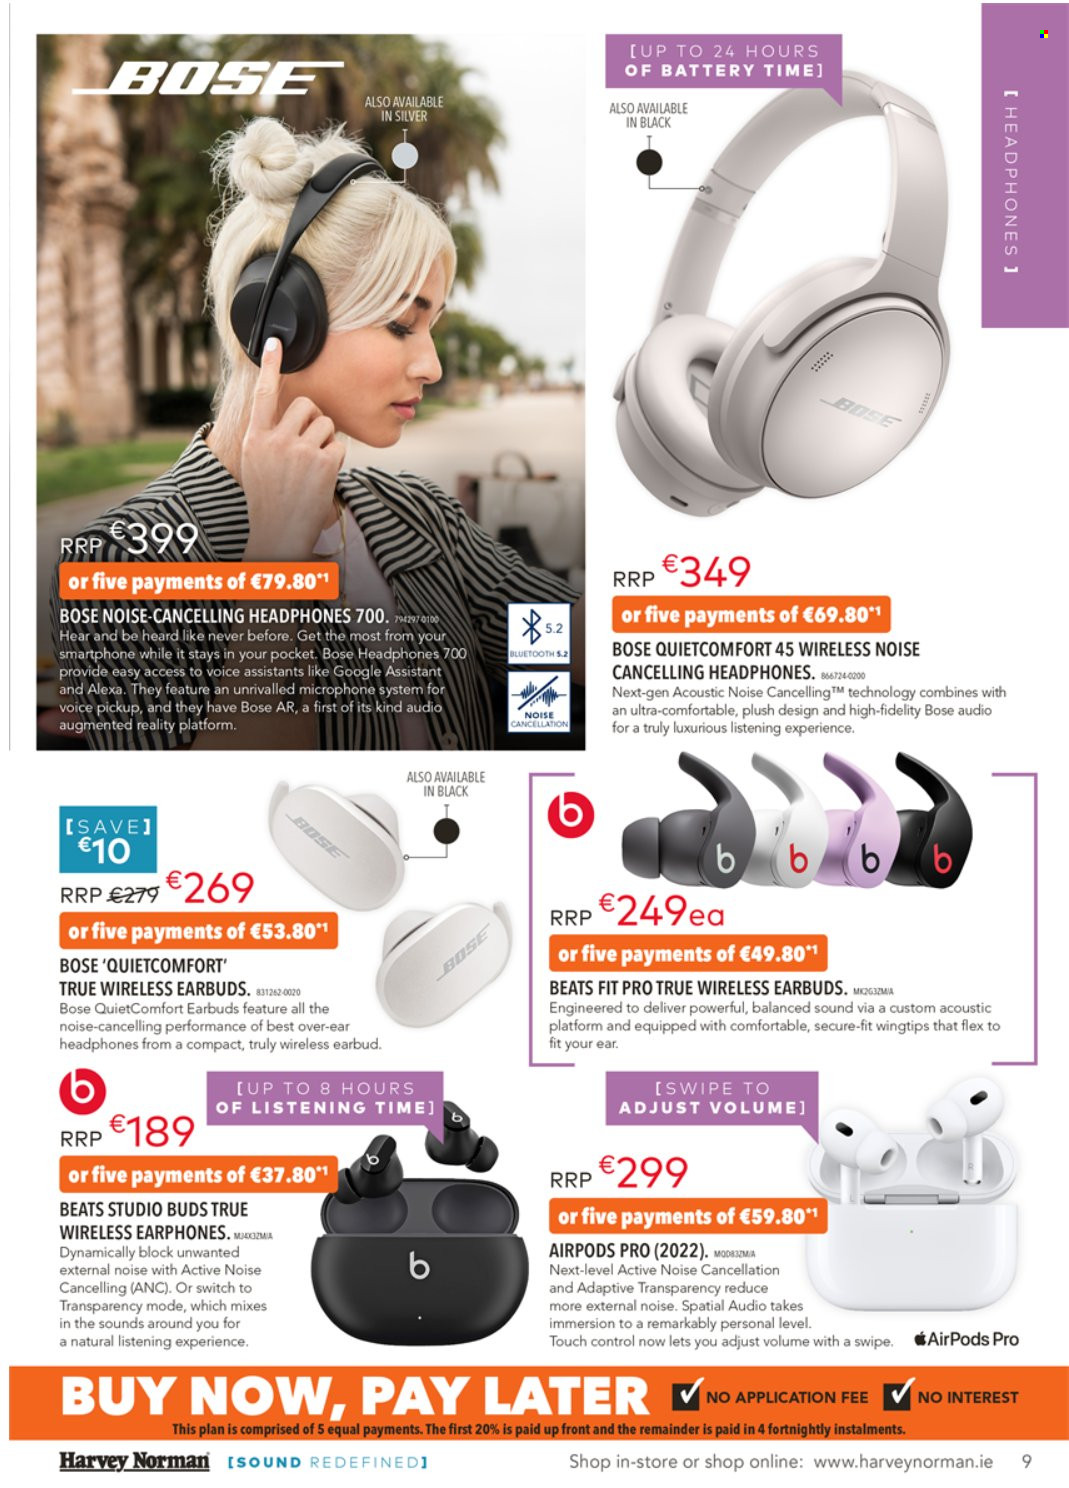 thumbnail - Harvey Norman offer  - 27.10.2022 - 24.12.2022 - Sales products - Beats, BOSE, microphone, headphones, Airpods, earbuds. Page 9.